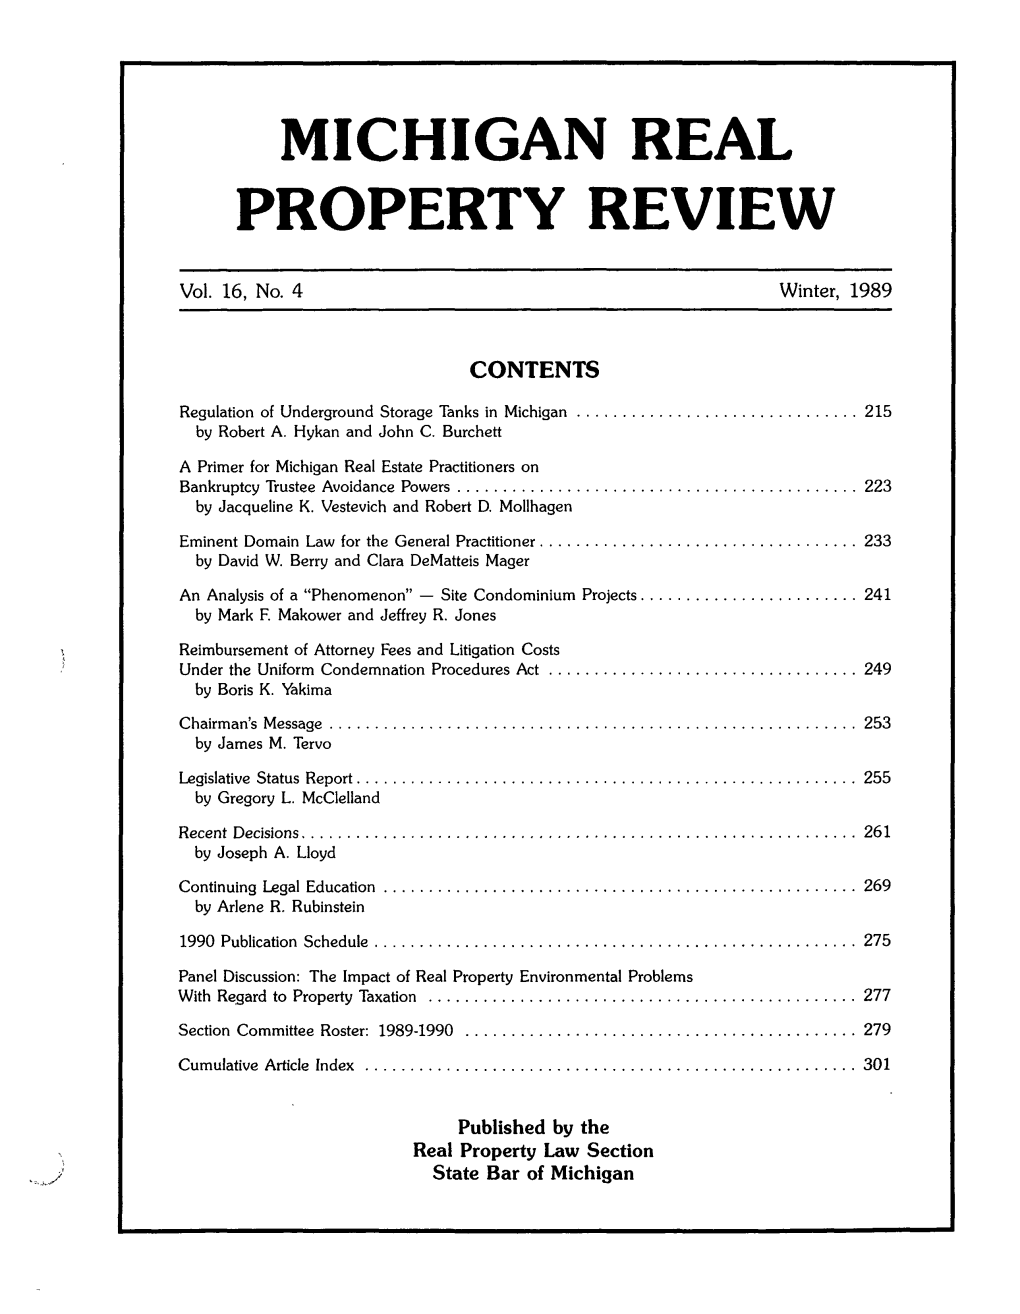 Michigan Real Property Review Winter 1989